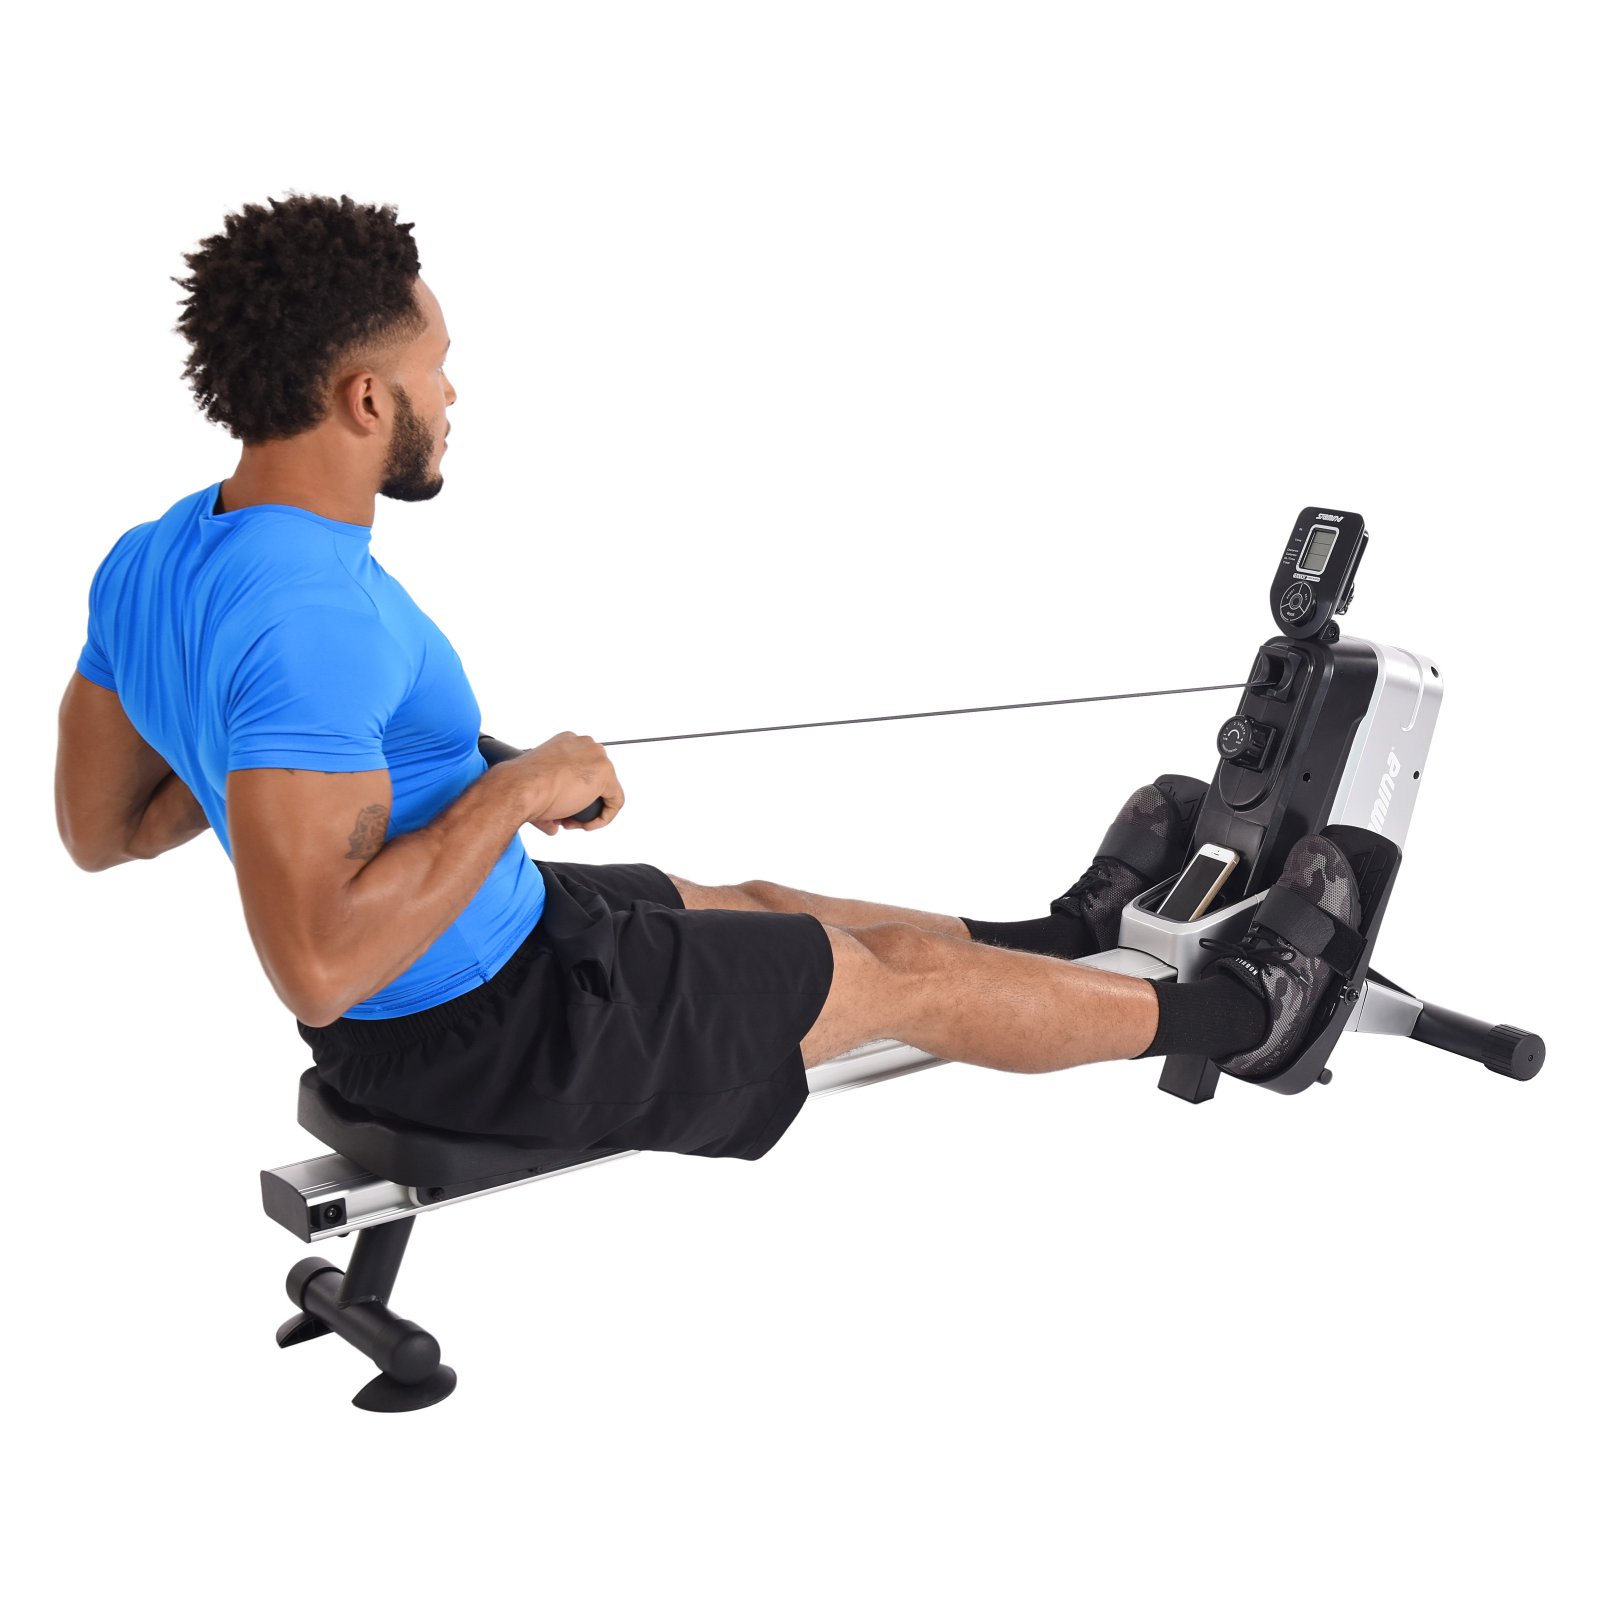 Stamina Products Multi-Level Magnetic Resistance Compact Rowing Machine - image 3 of 11